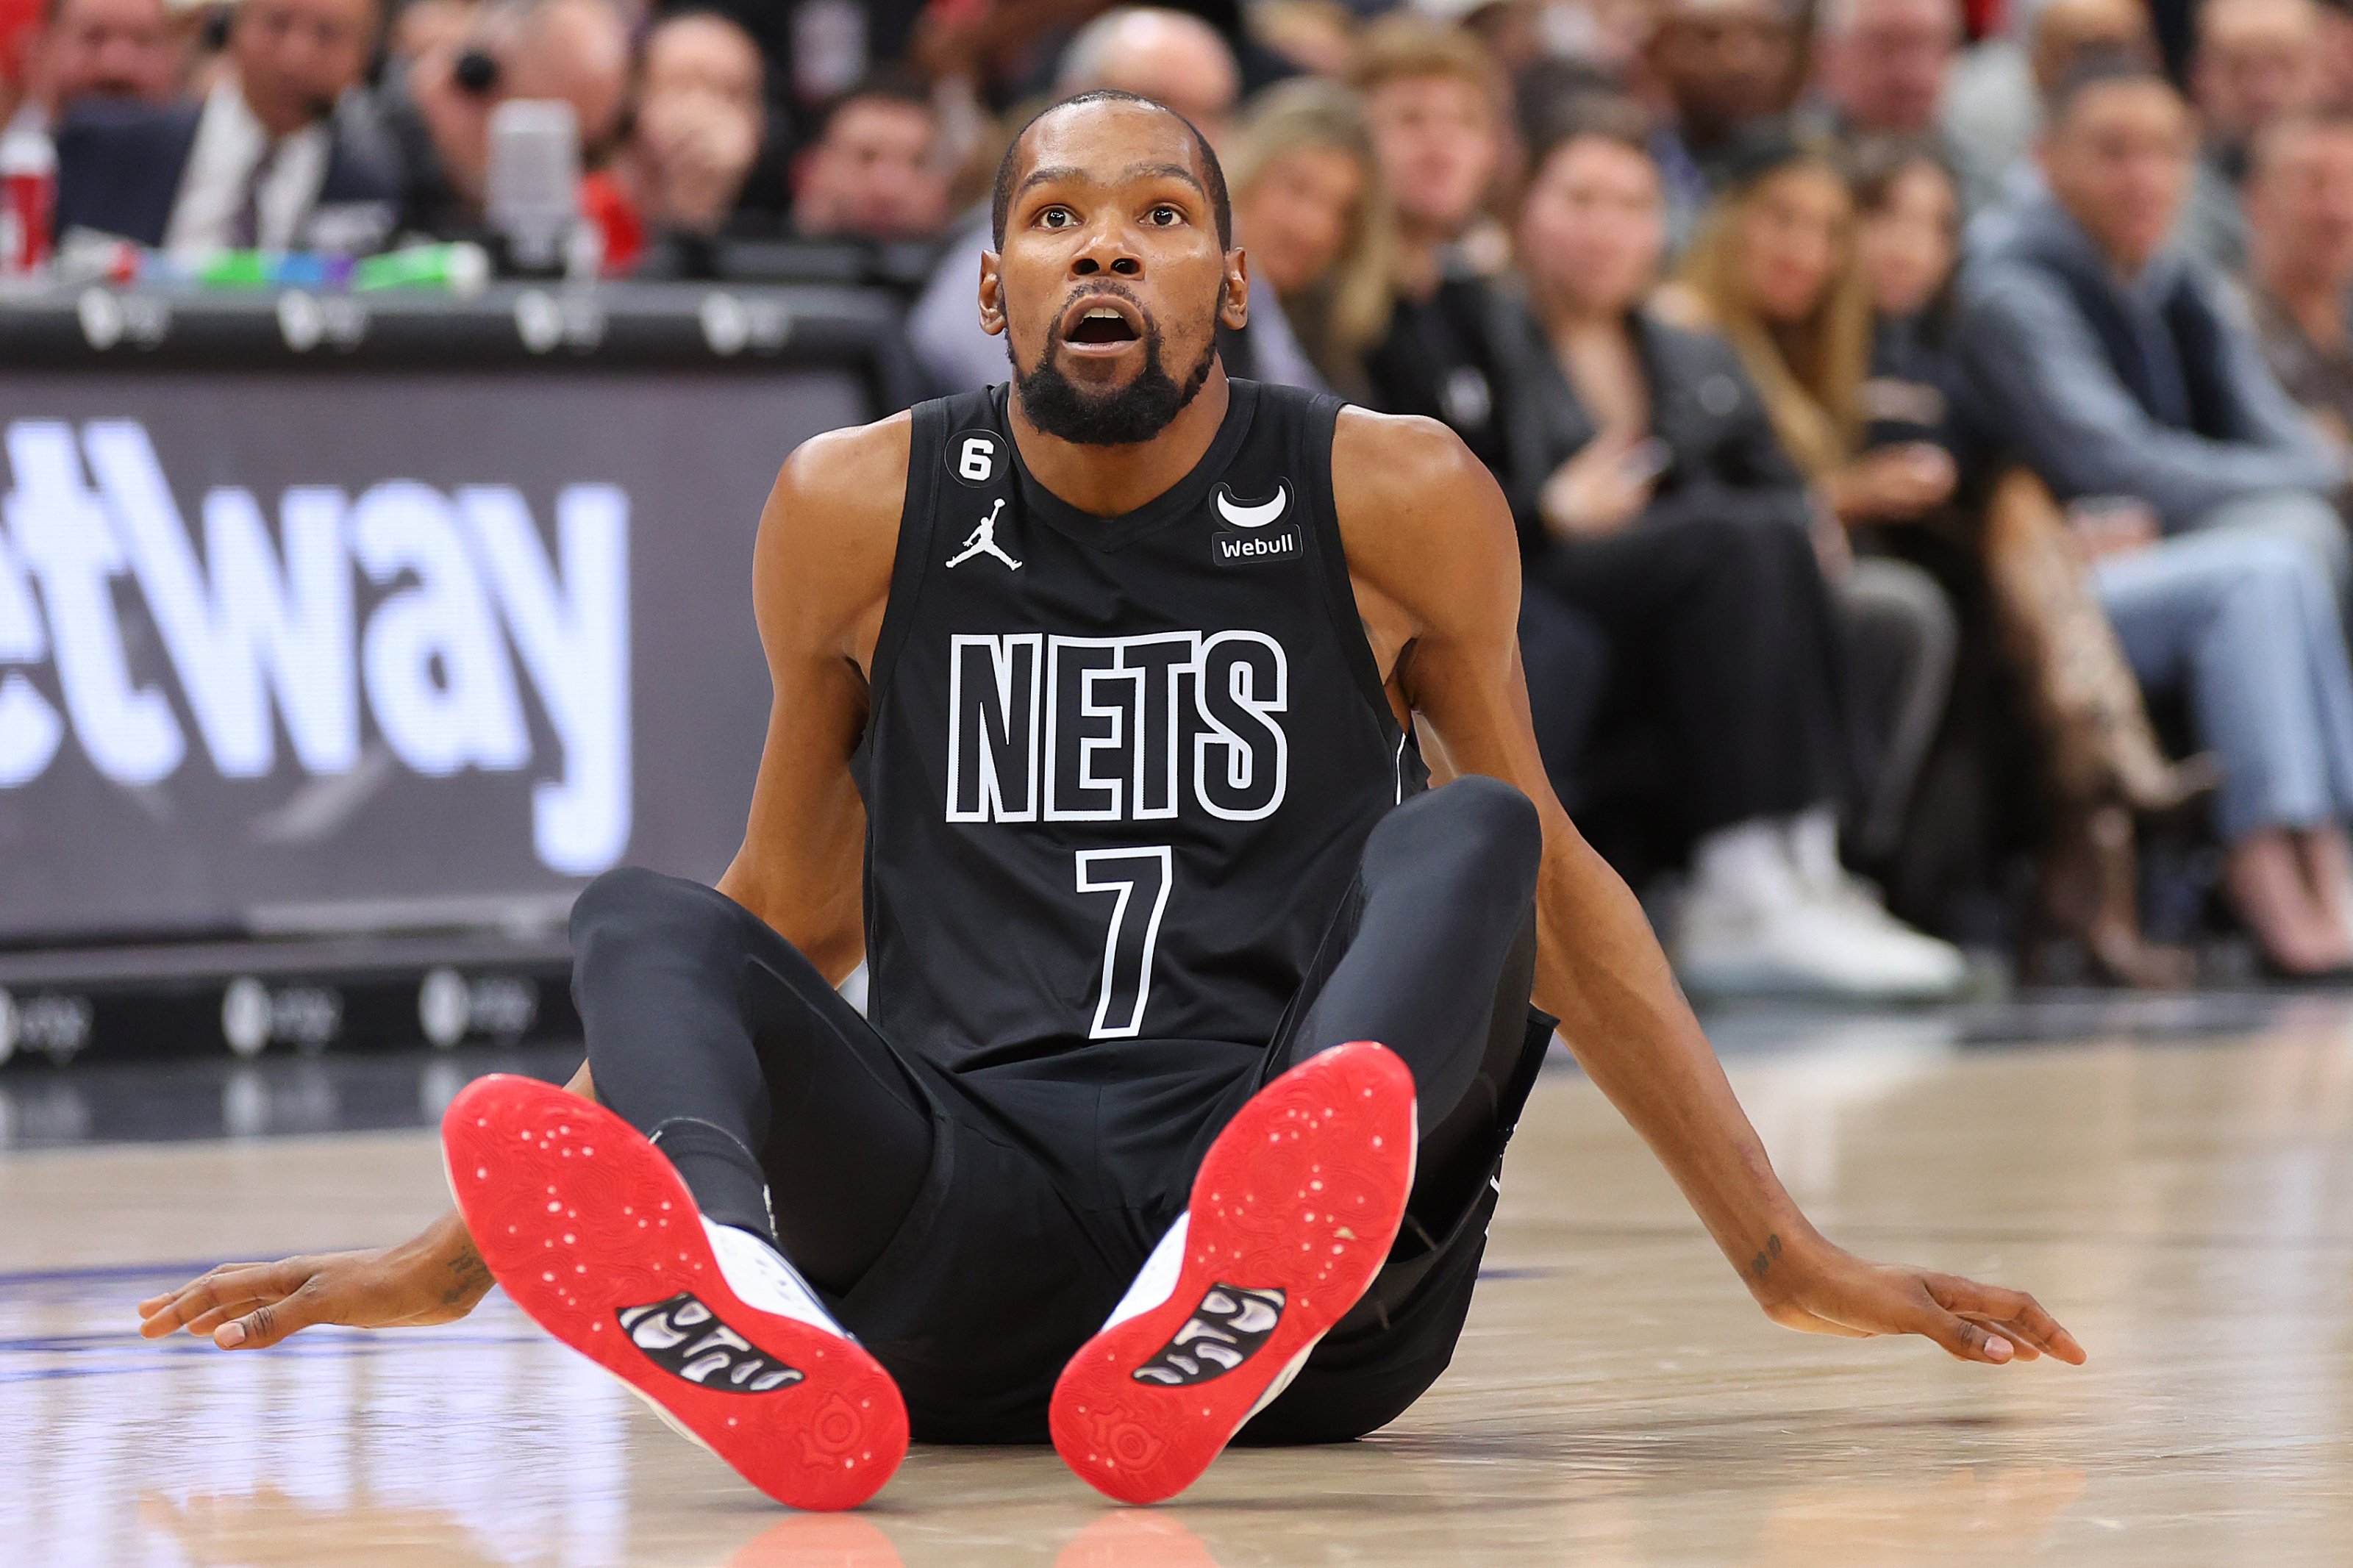 Will it be the end of Kevin Durant with the Nets if they get swept